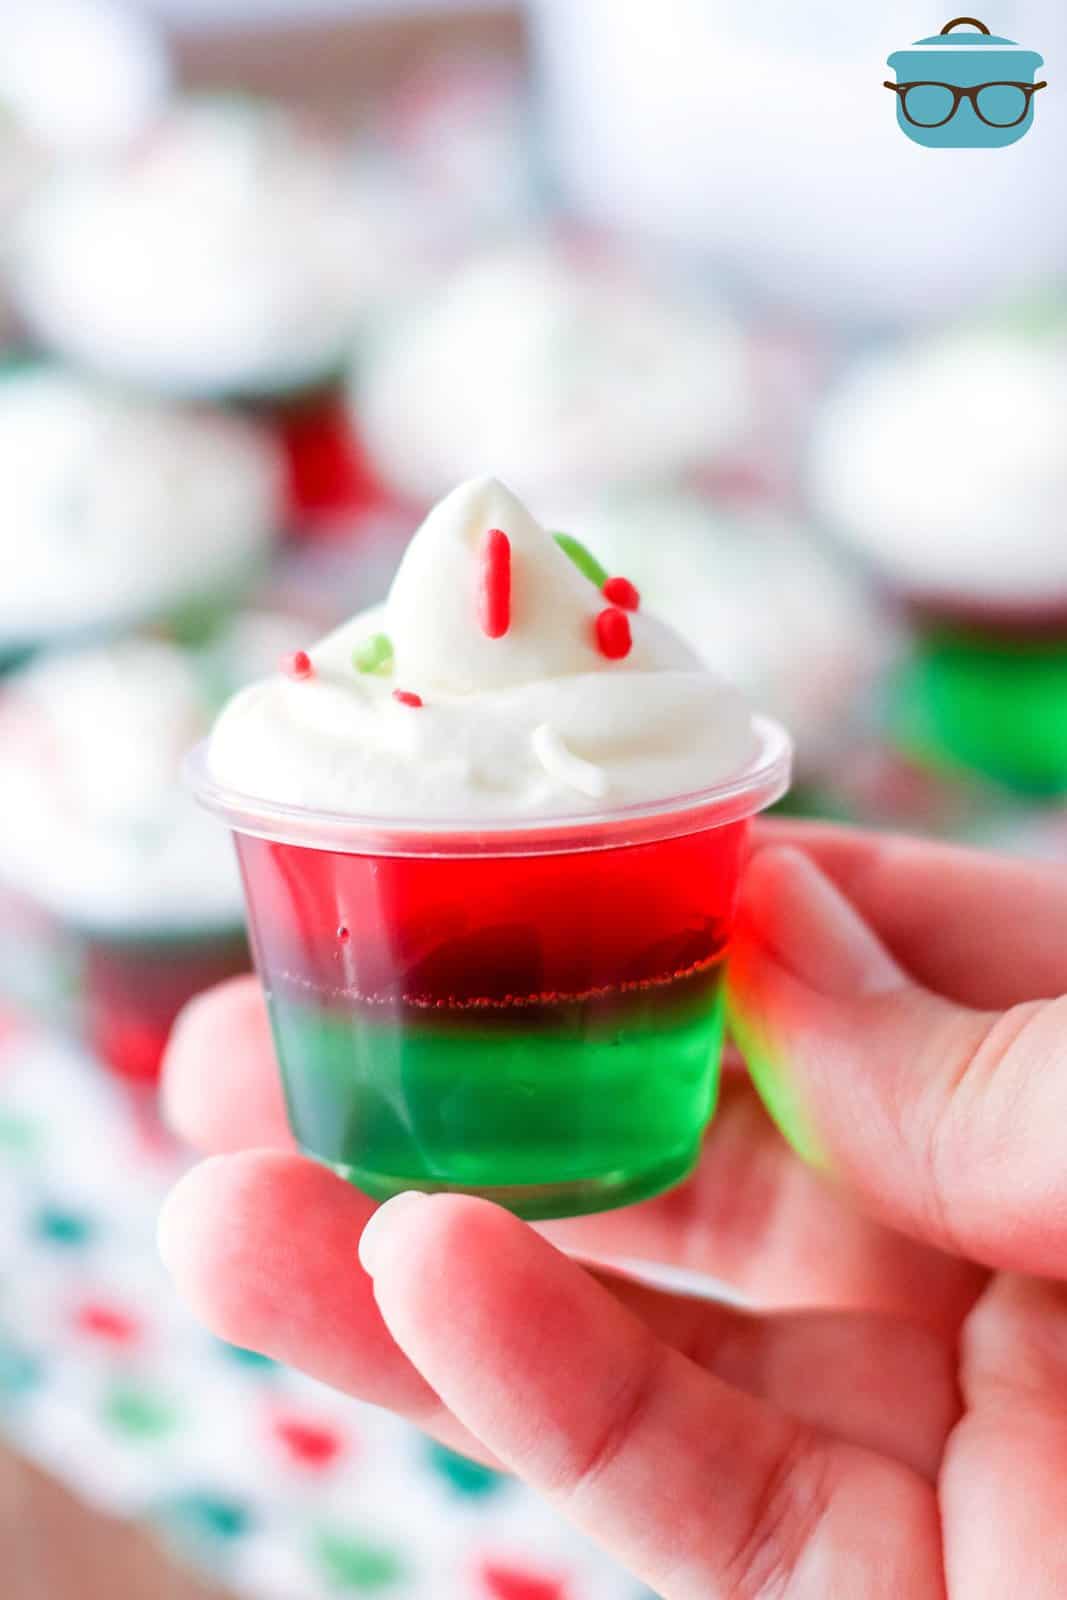 Hand holding up one of the Holiday Jell-O shots.